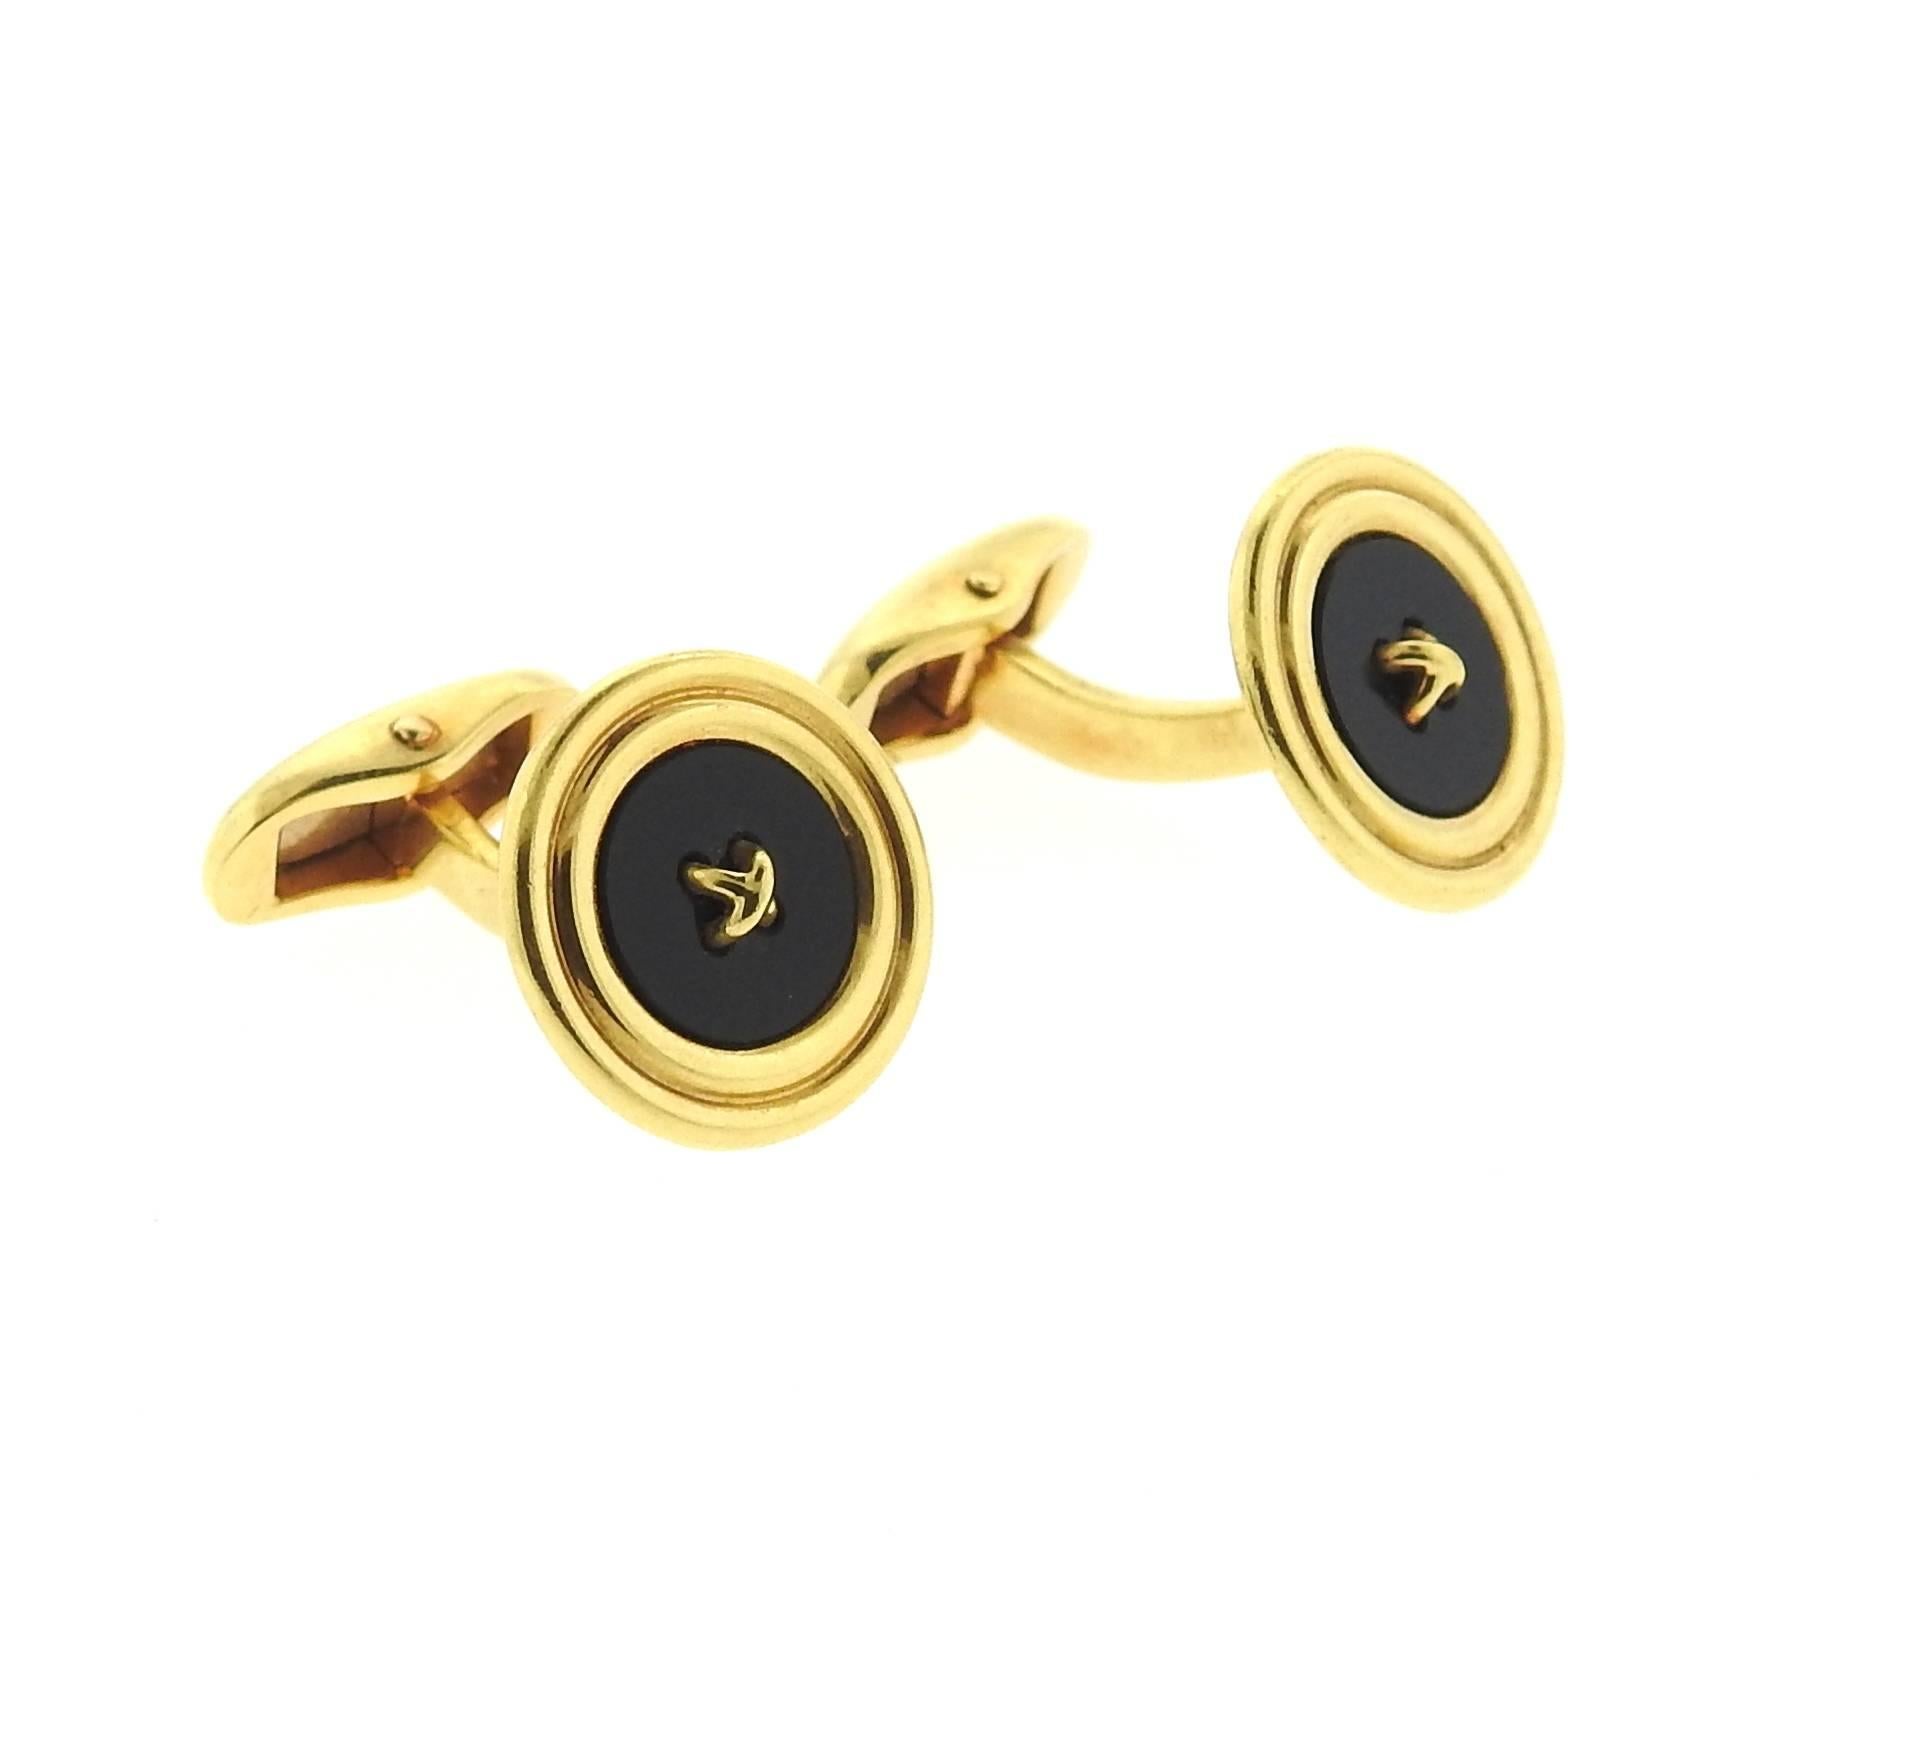 A pair of 18k yellow gold button cufflinks, crafted by Tiffany & Co,set with onyx in the center. Cufflink top is 16mm in diameter. Marked: Tiffany & Co, 18Kt Germany. Weight - 20 grams 